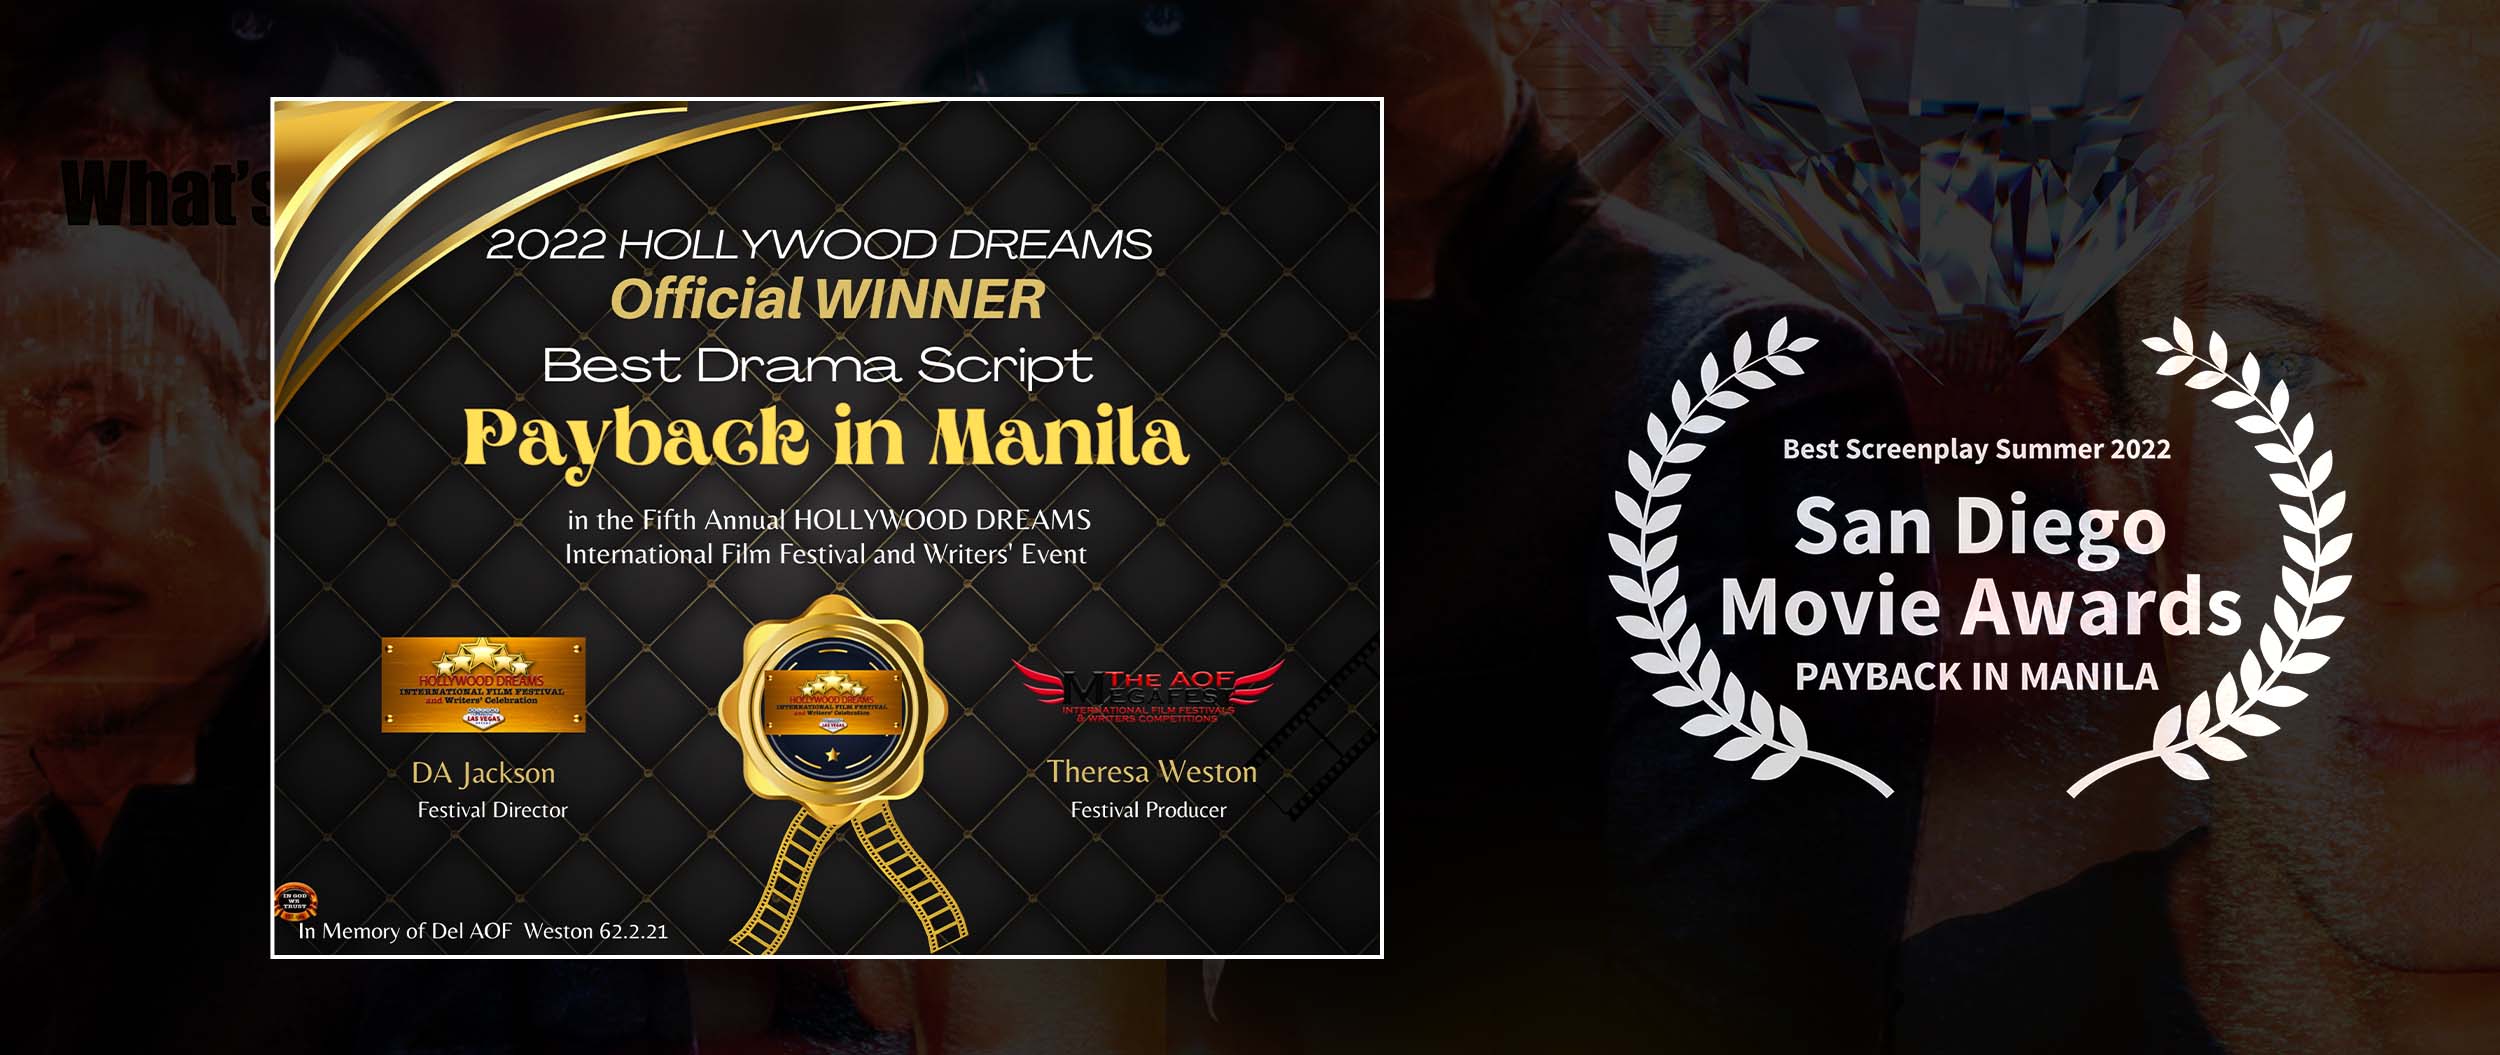 PAYBACK IN MANILA  San Diego Movie Awards, and  Action on Film